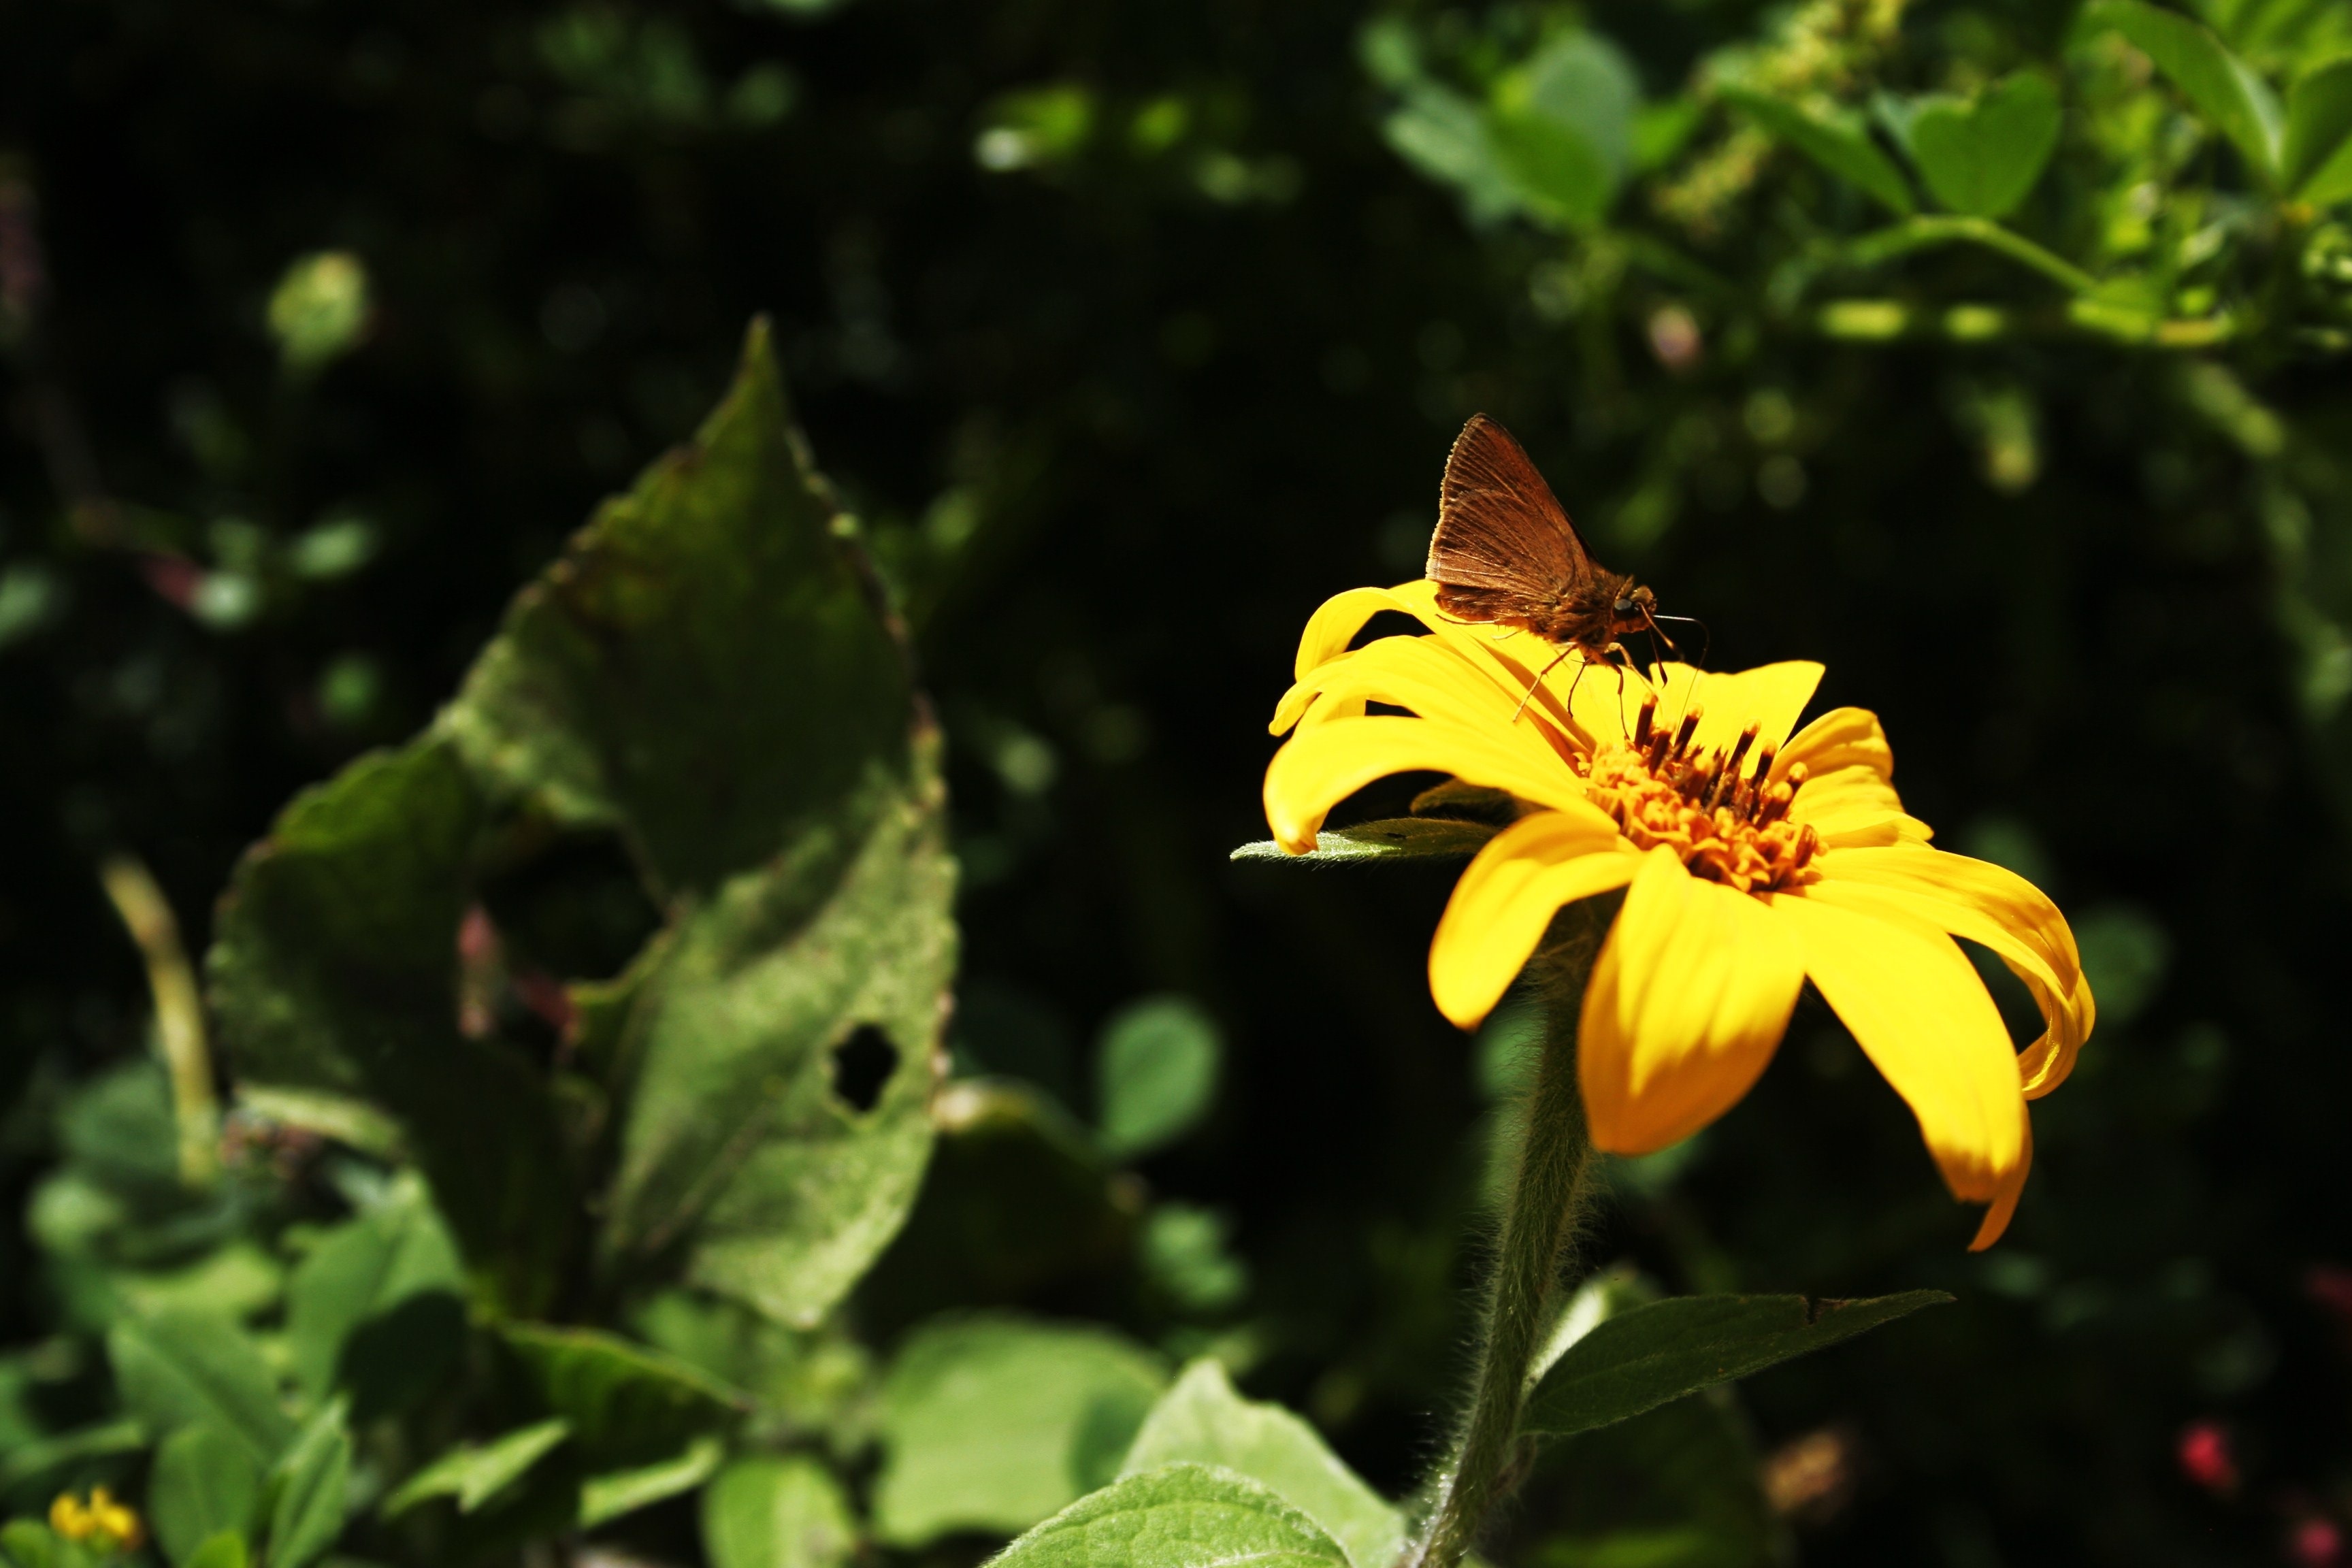 brown butterfly on yellow petaled flower closeup photography during daytime